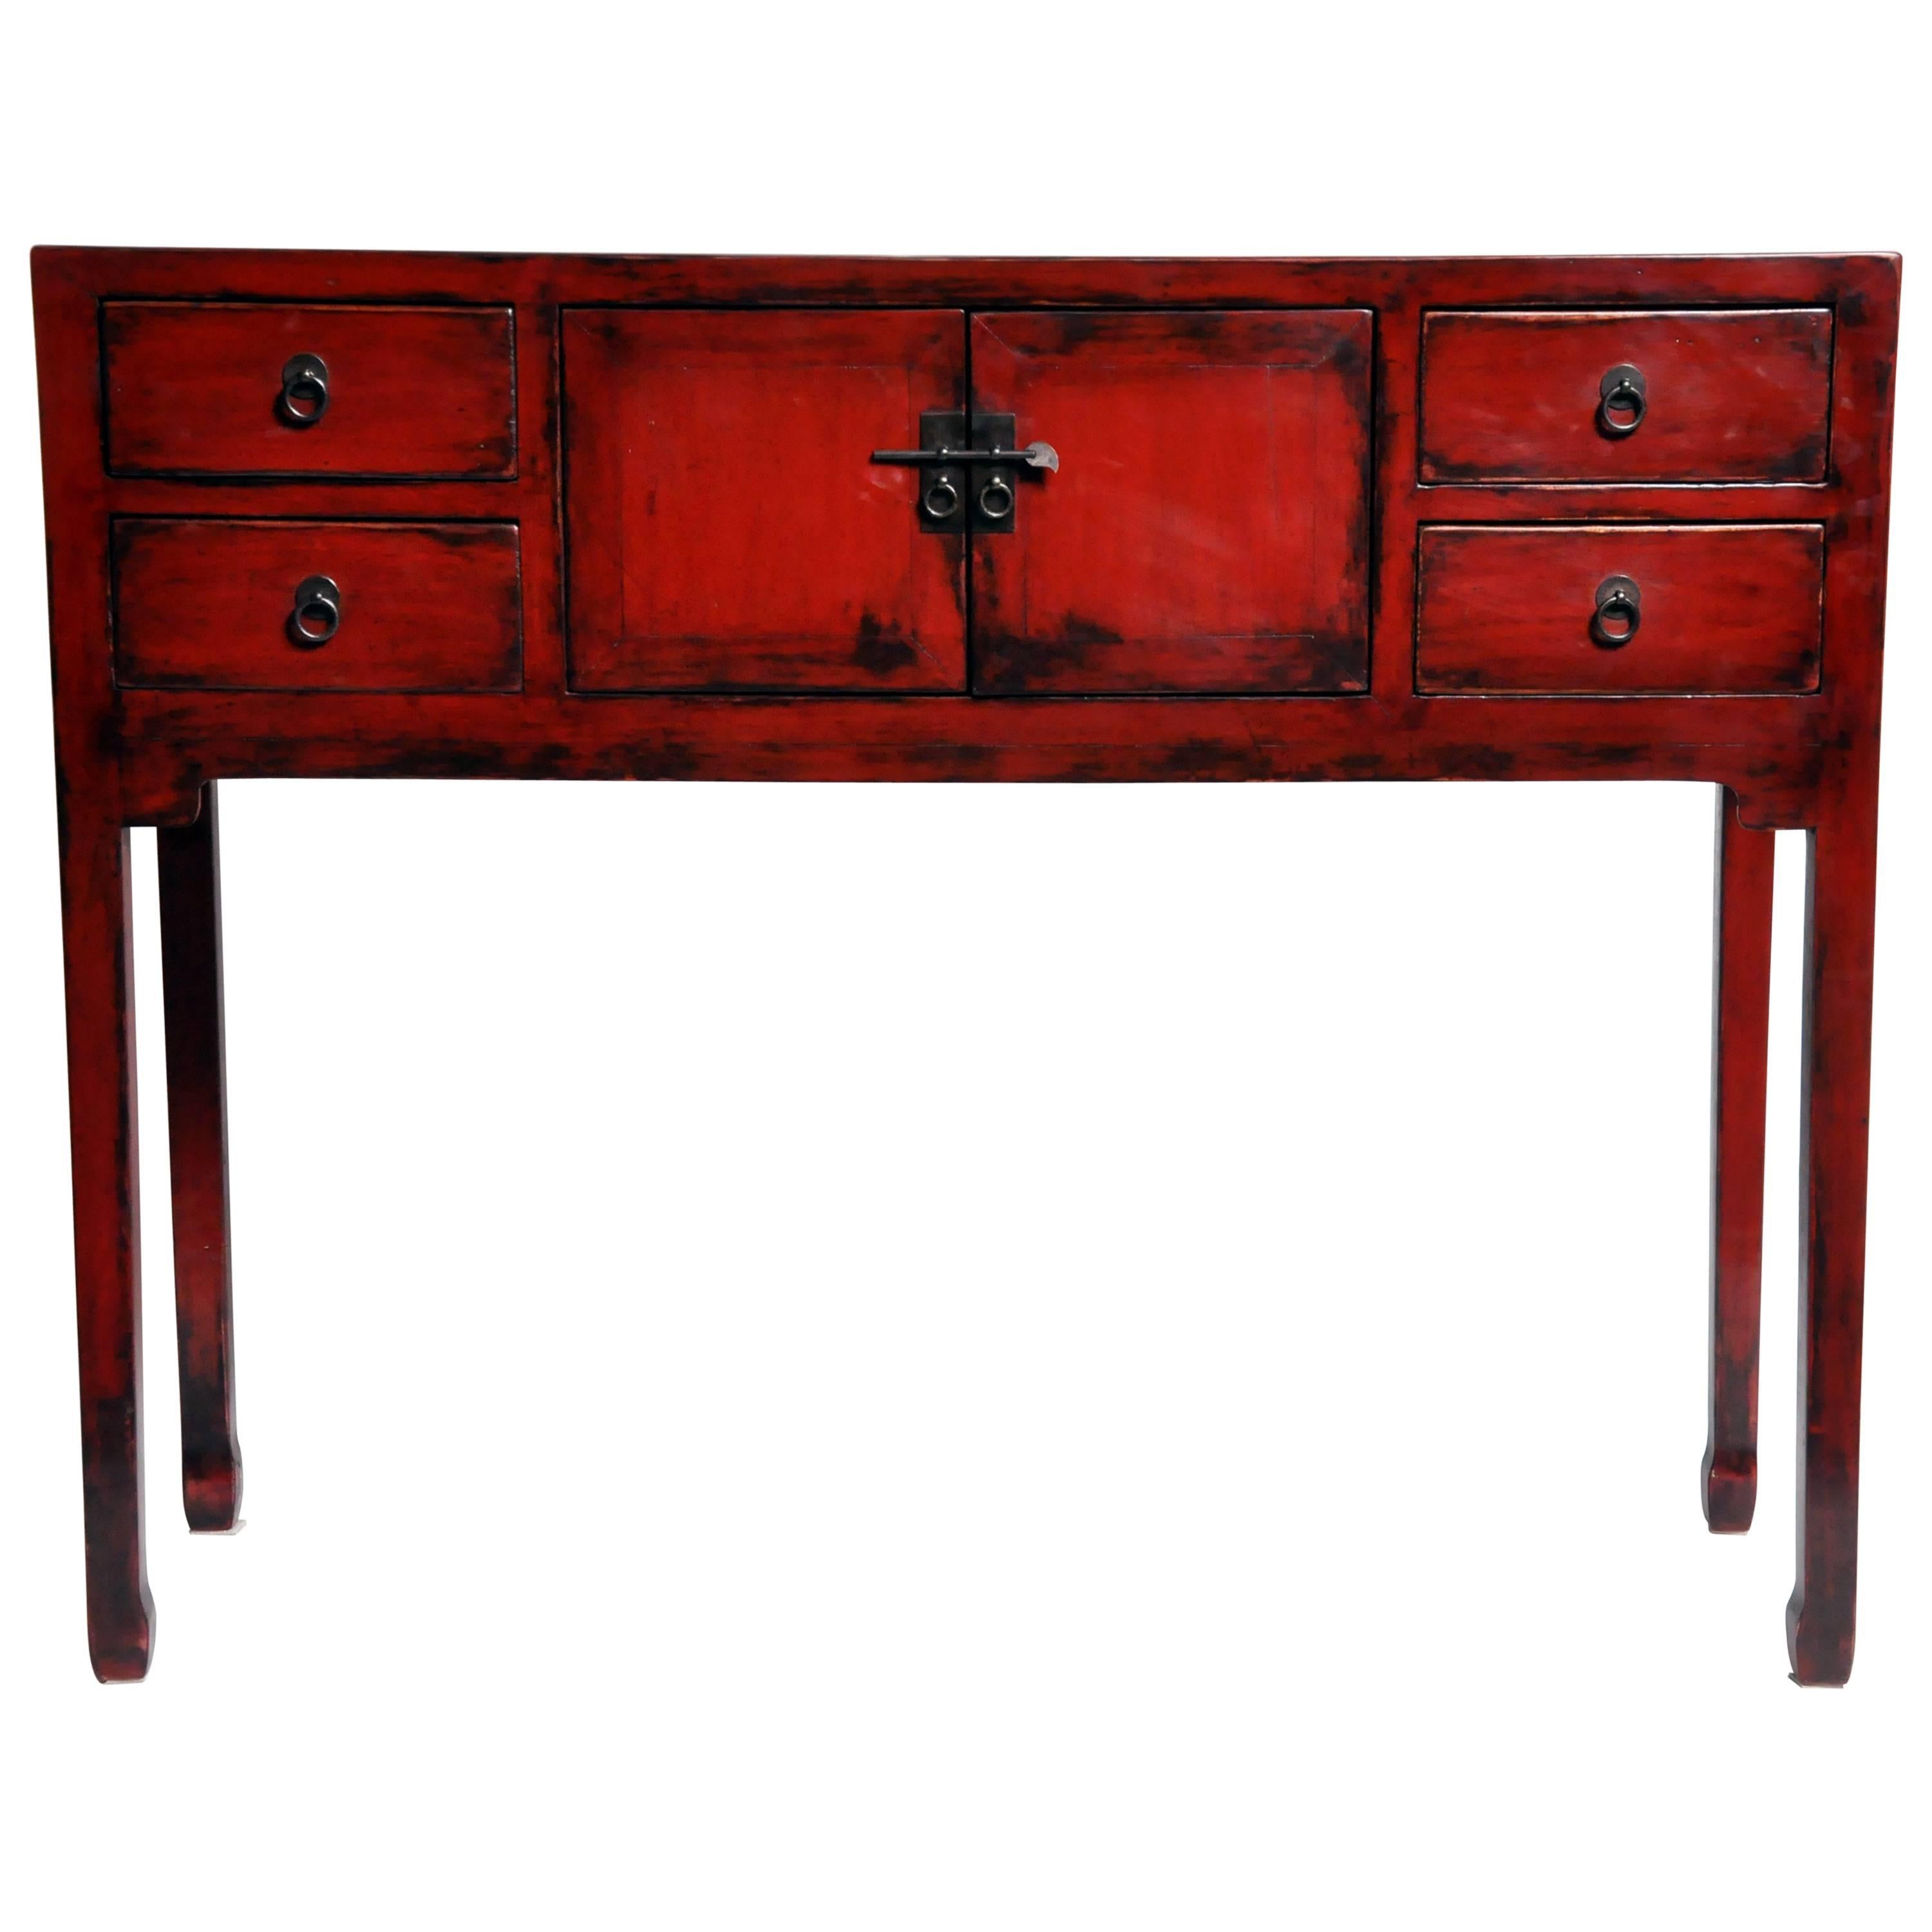 Red-Lacquered Chinese Console Table with Four Drawers